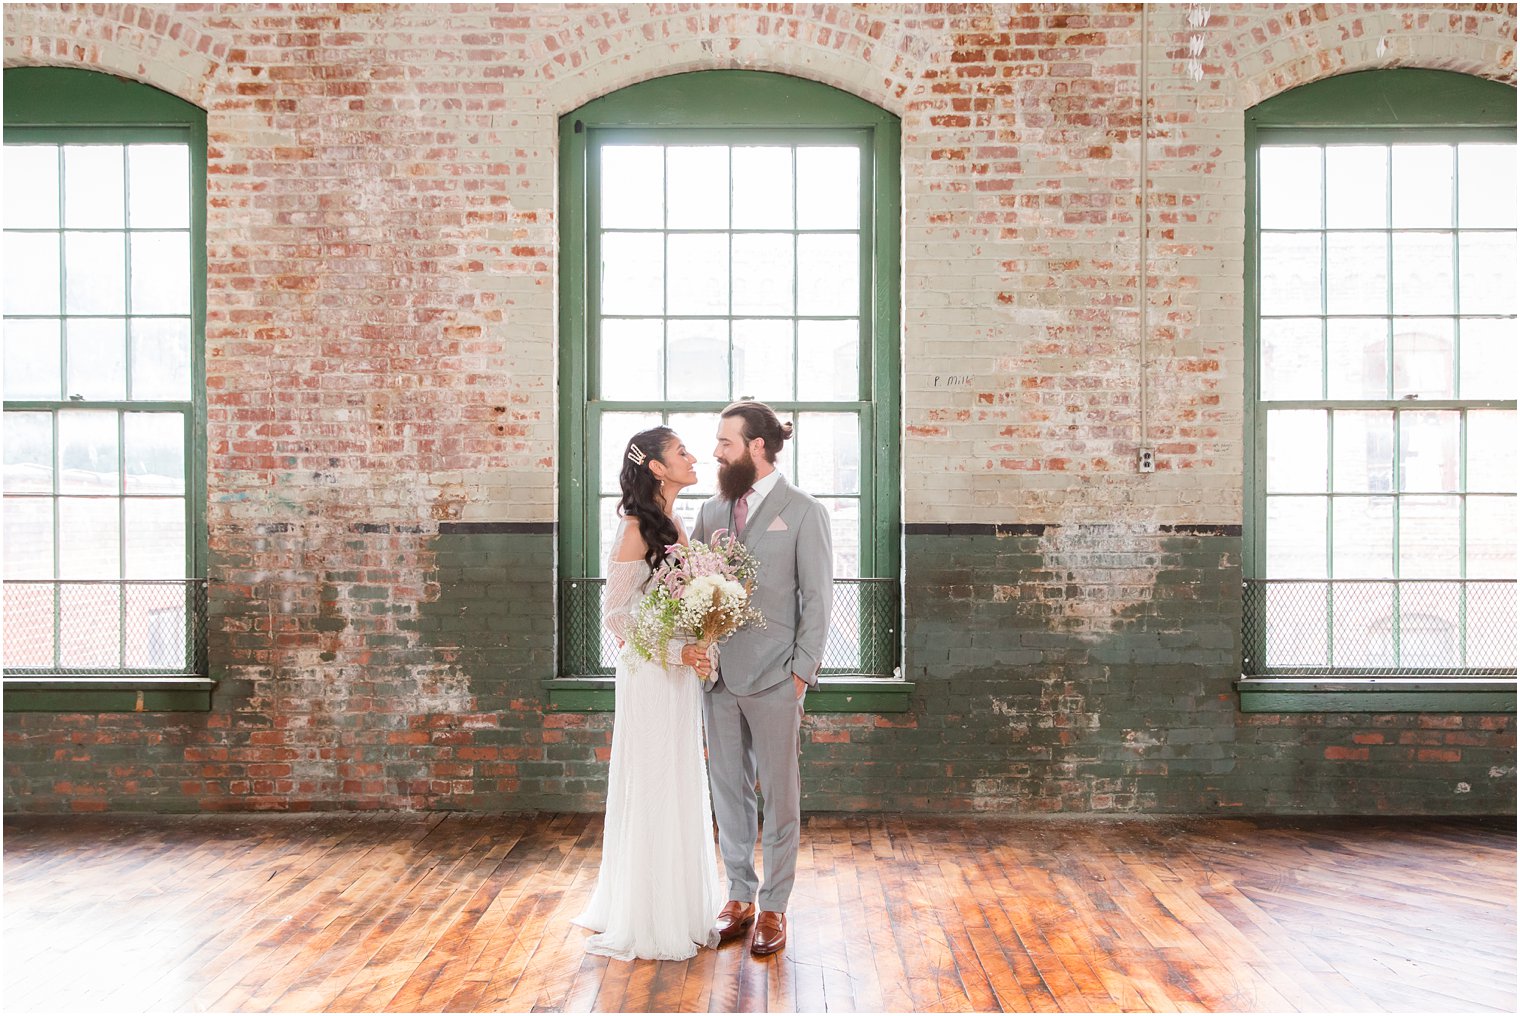 Bride and groom portrait at Art Factory Studios in Paterson NJ 